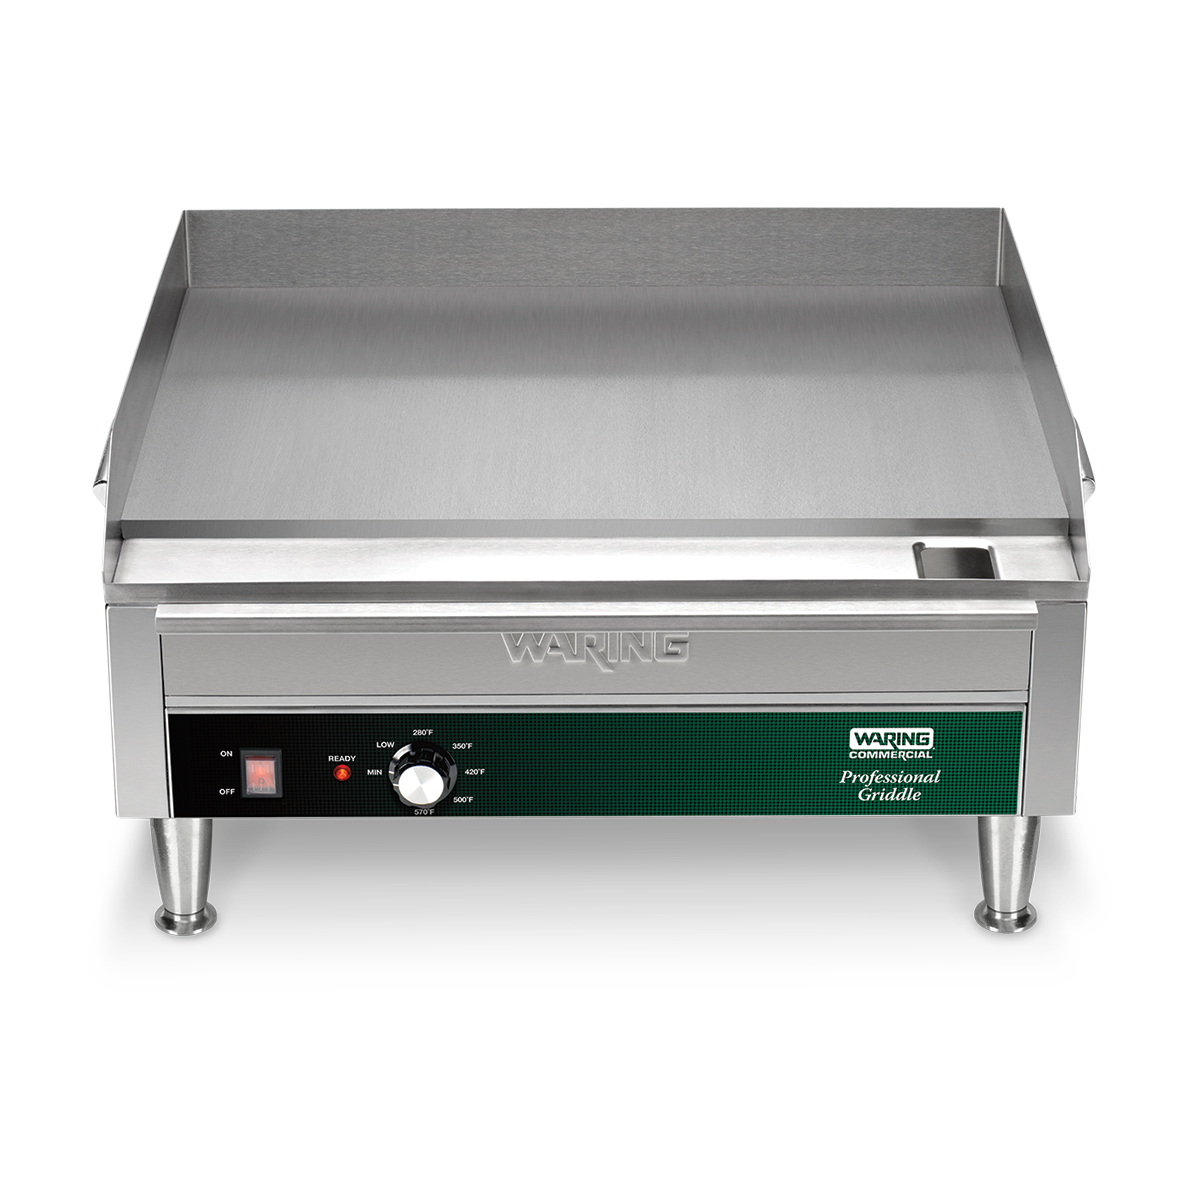 https://www.waringcommercialproducts.com/files/products/waring-wgr240x-countertop-griddle.png